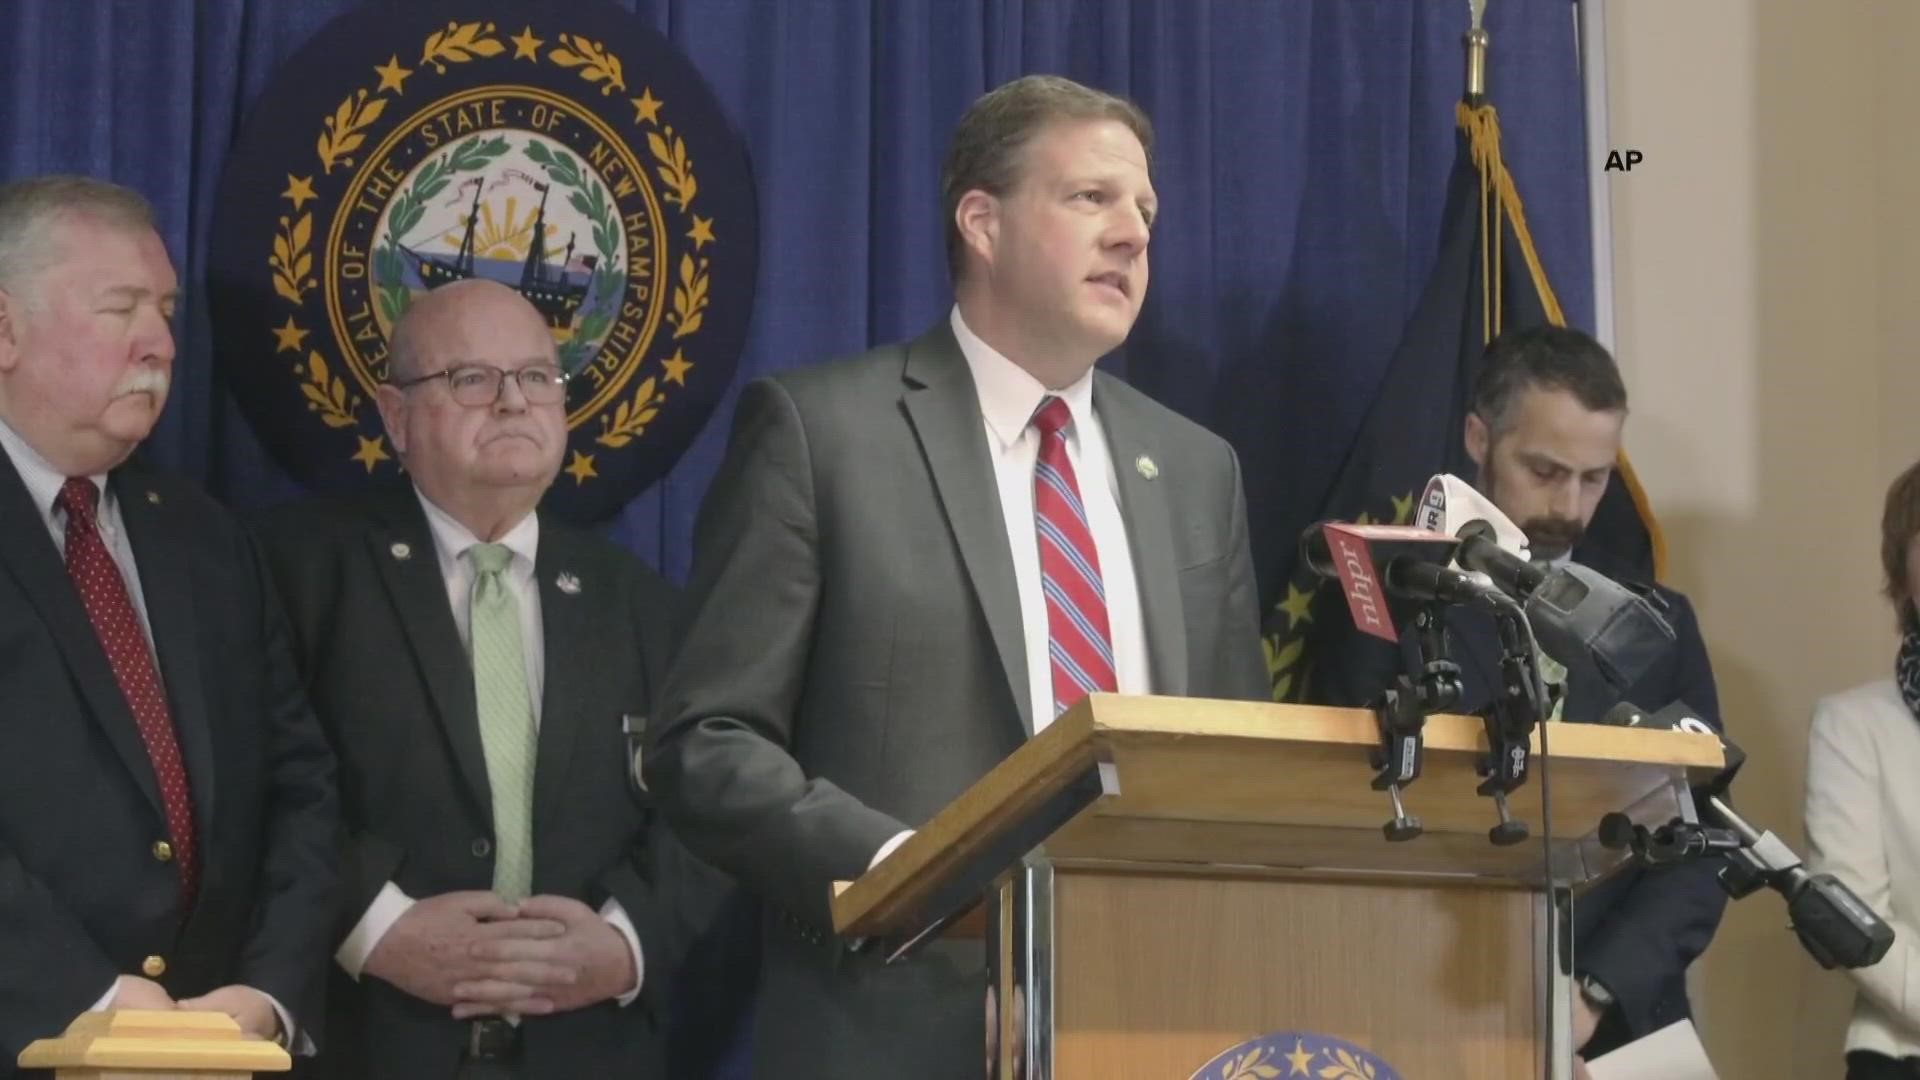 New Hampshire Republican Governor Chris Sununu says he's considering running for president in 2024.